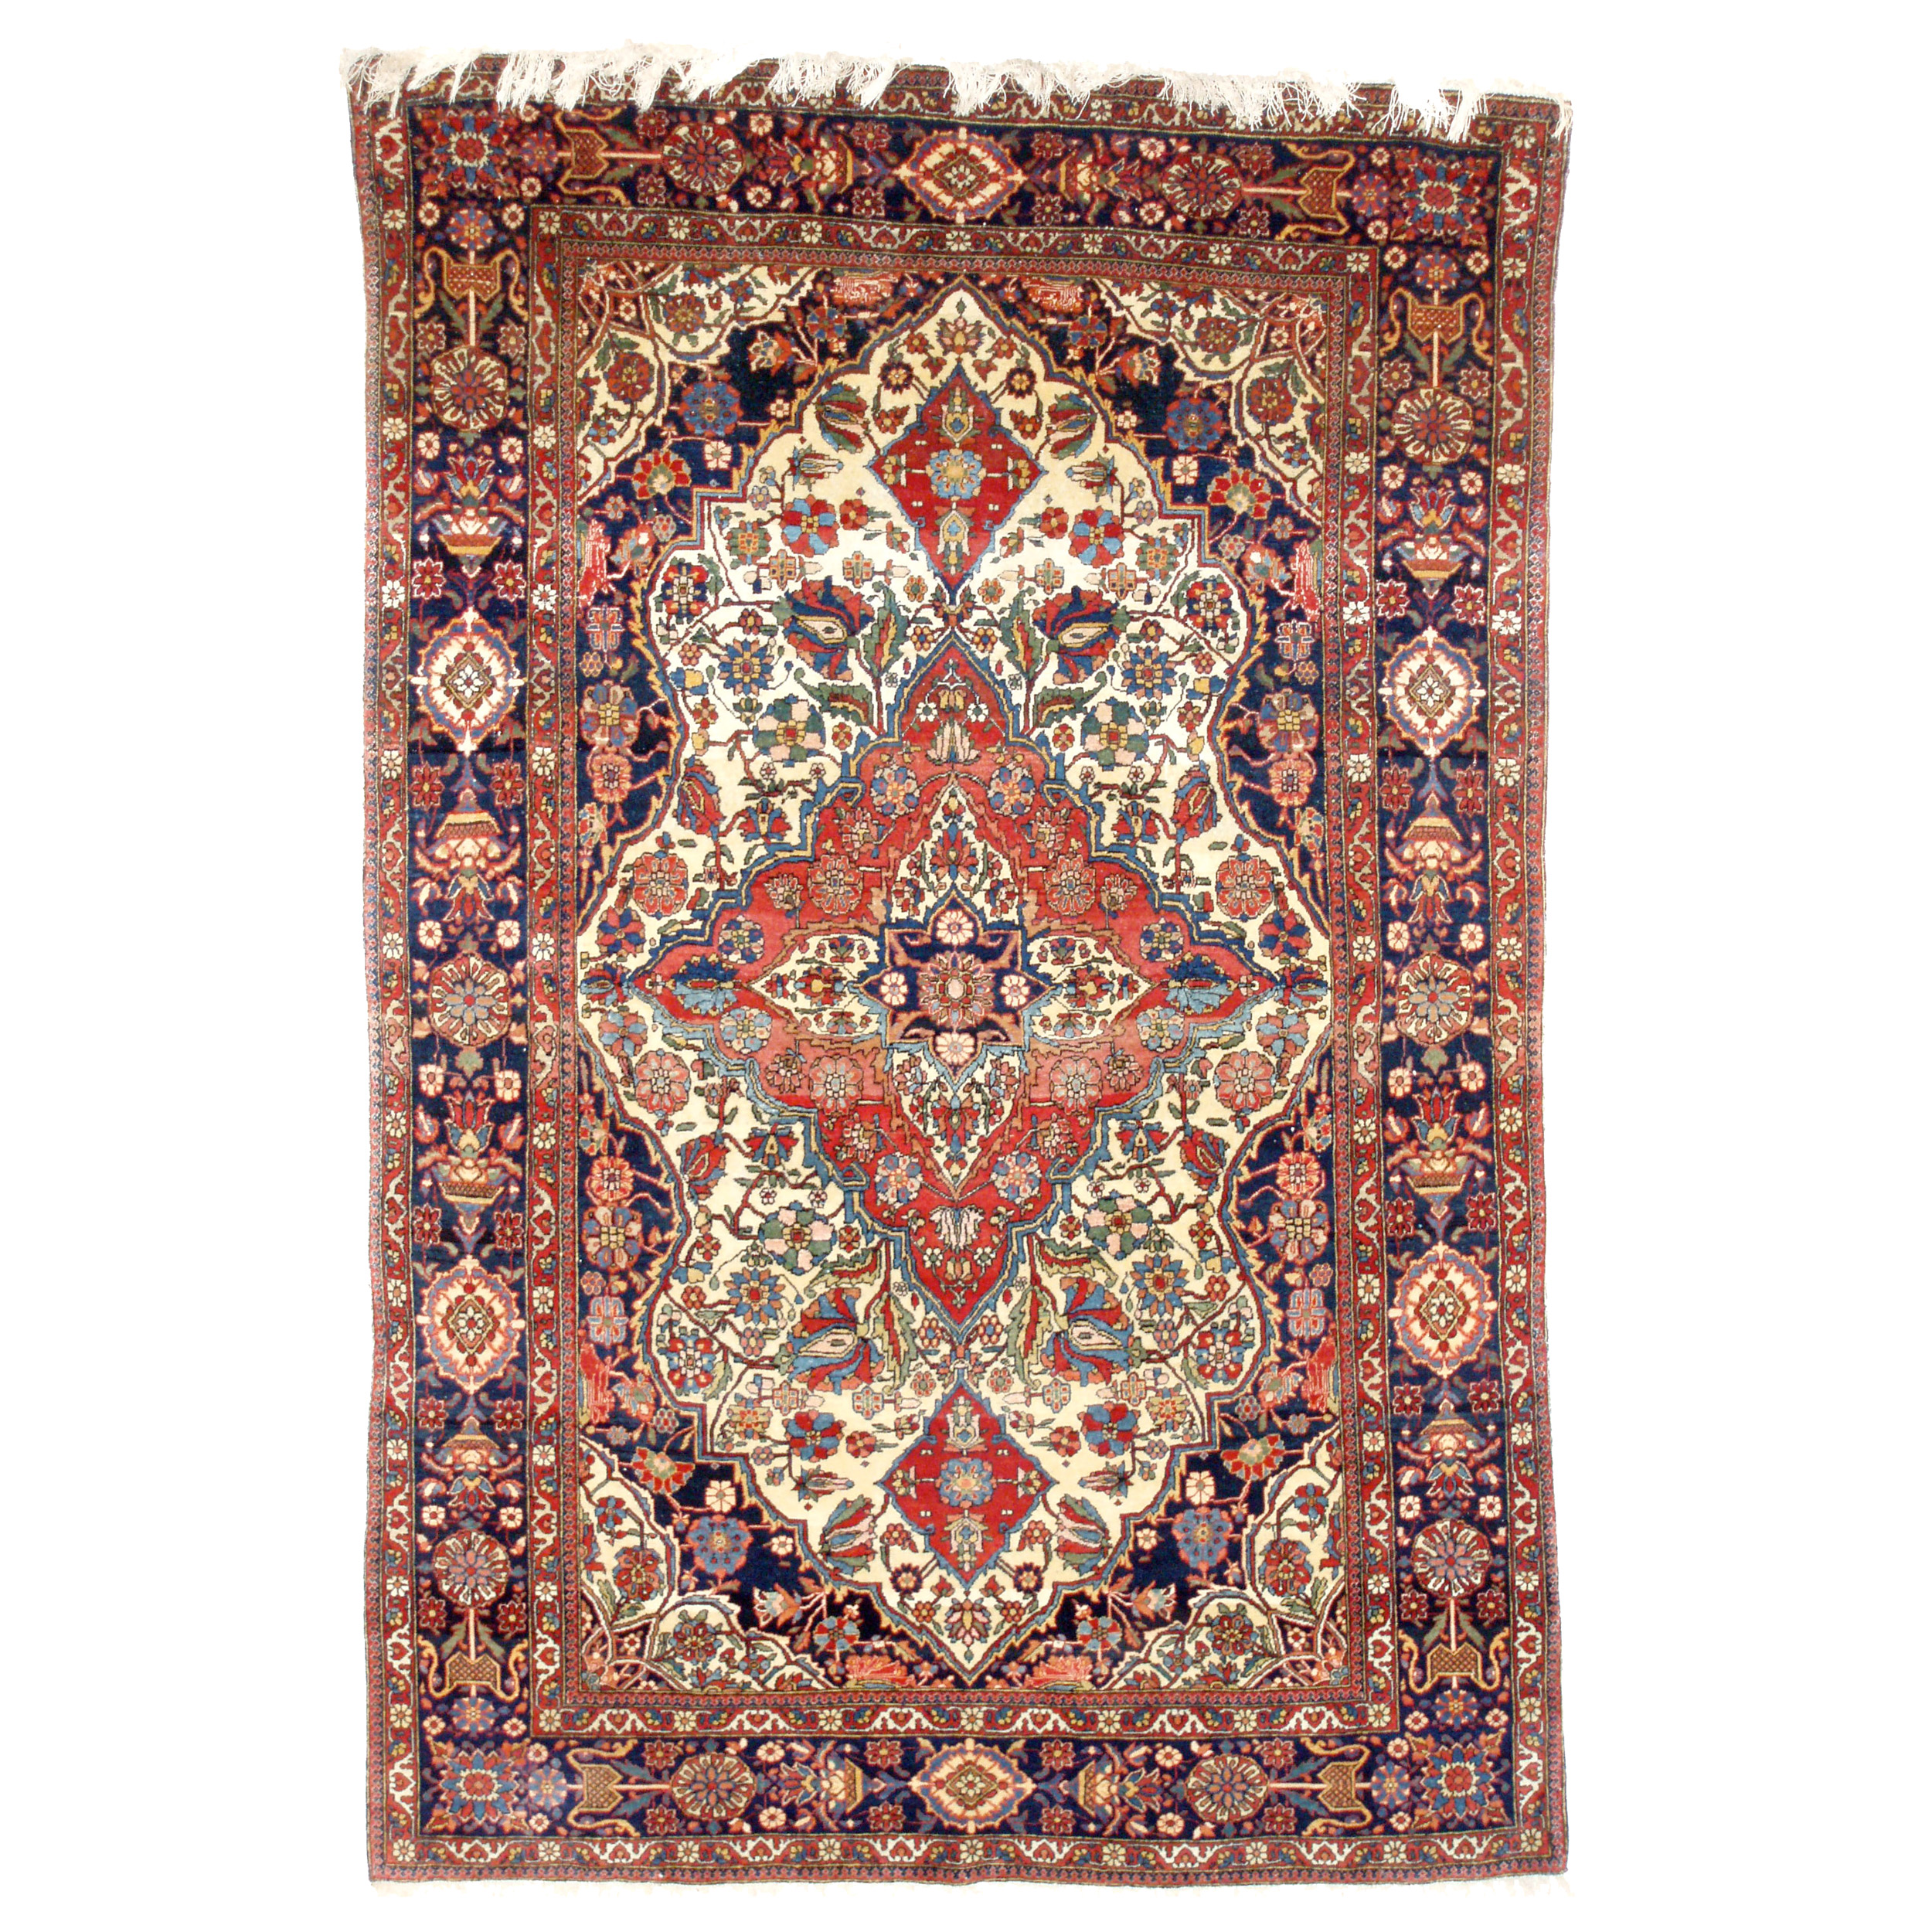 Antique Persian Mohtasham Kashan rug with ivory field and brick red medallion, Douglas Stock Gallery, antique Oriental rugs Boston,MA area